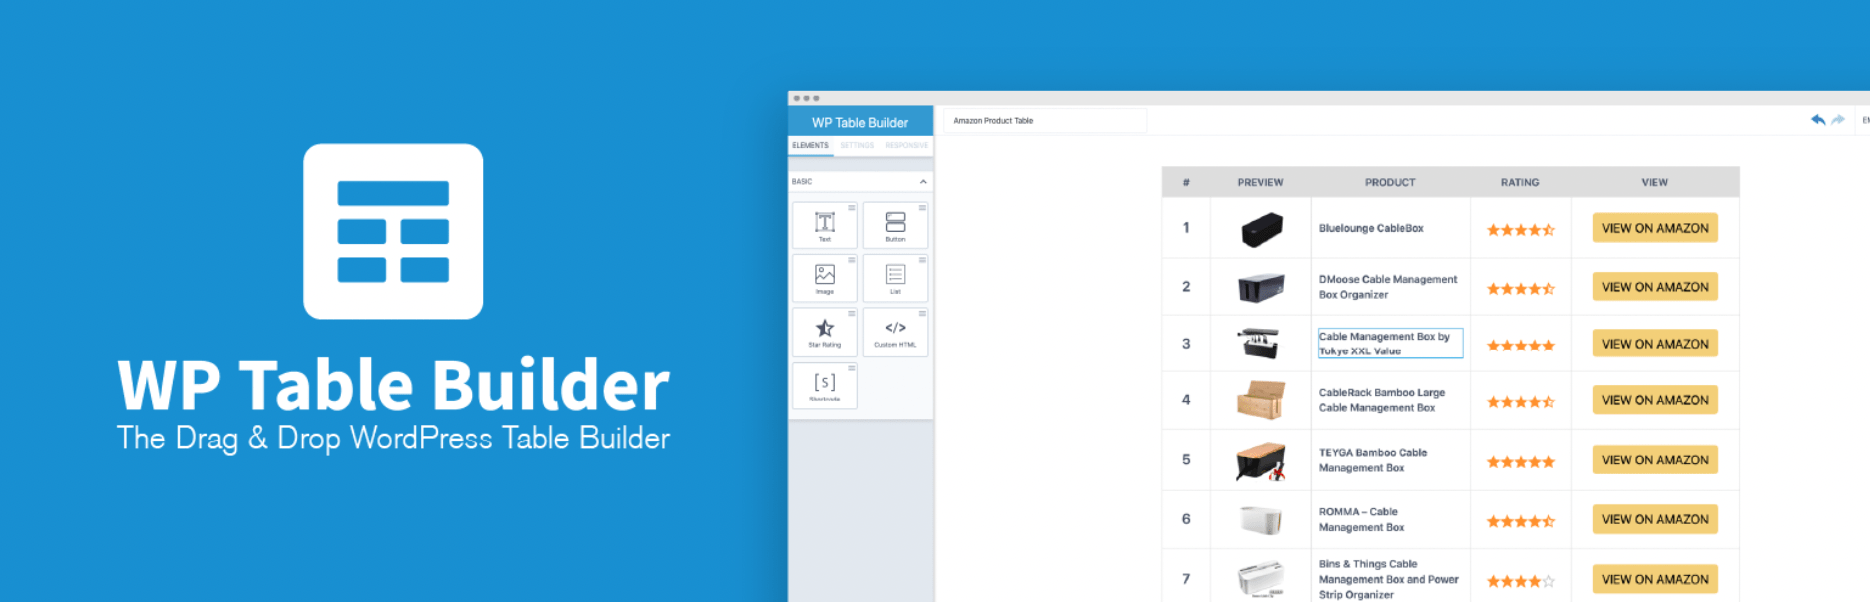 The WP Table Builder plugin.